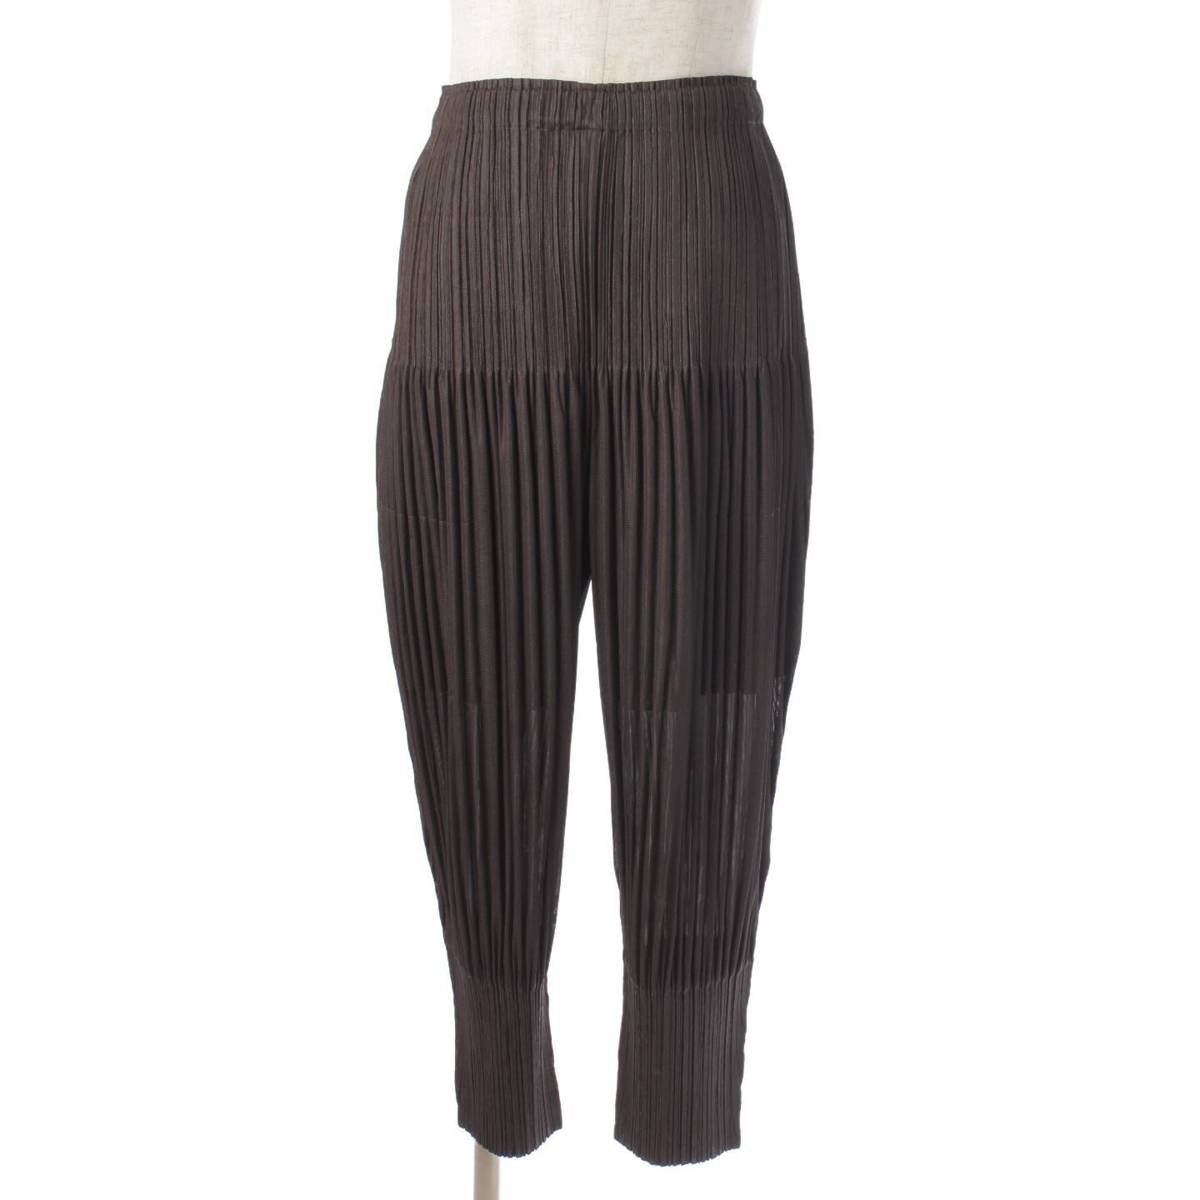 v[cv[Y CbZC~P(PLEATS PLEASE ISSEY ) 23N THICKER BOTTOMS |GXe v[c pc PP31JF394 O[ 2